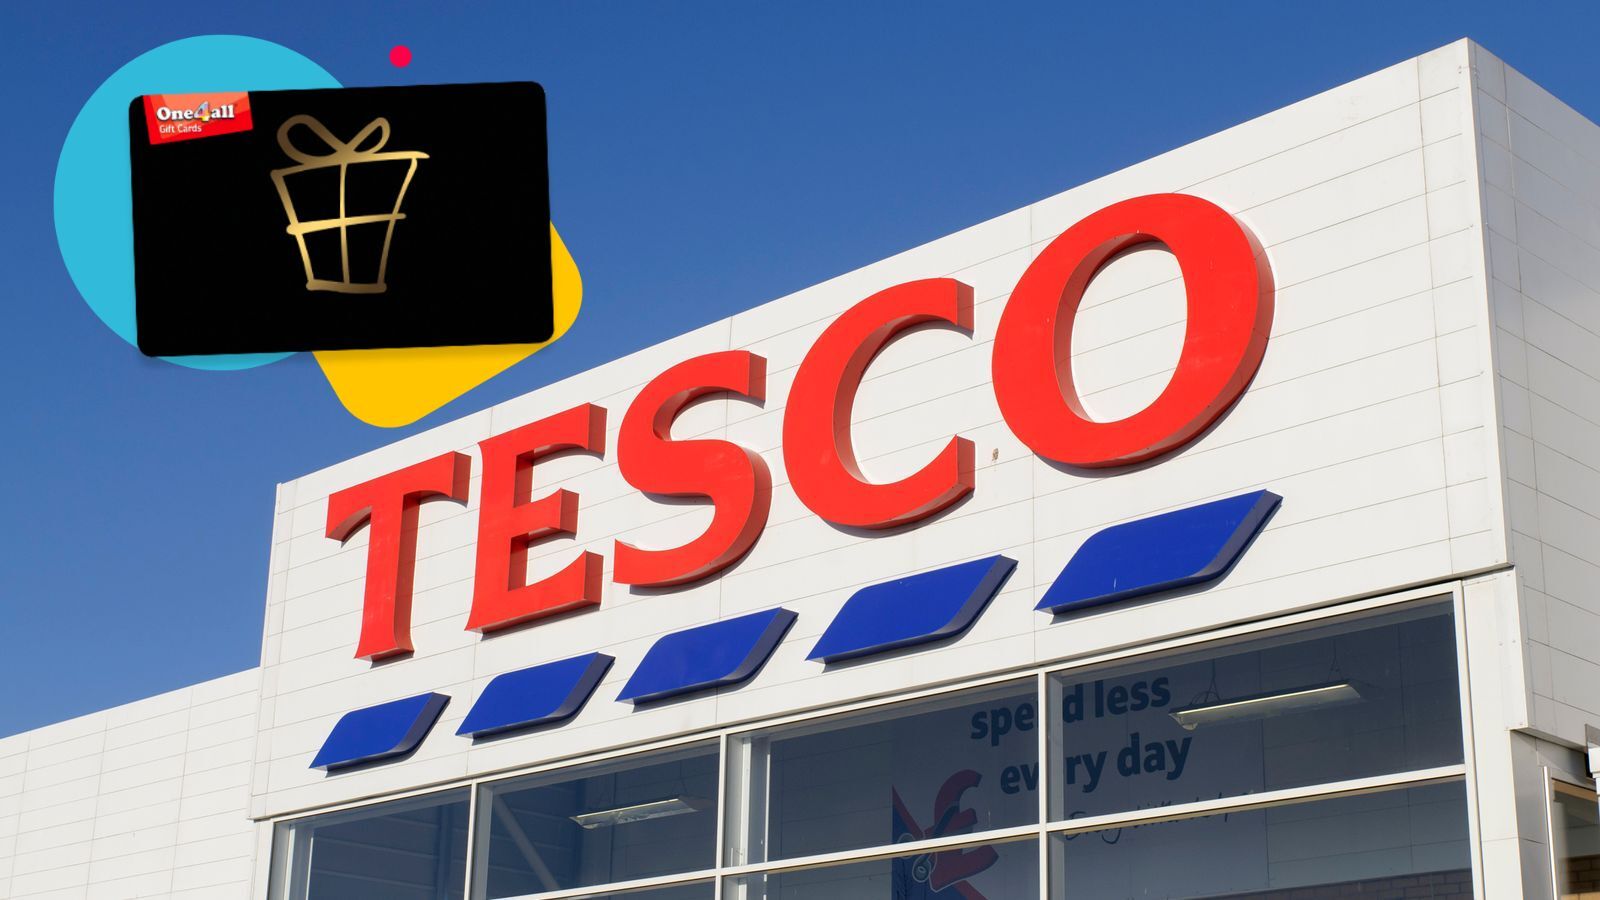 Does Tesco Take One4all Vouchers? (Yes, How to Do That)